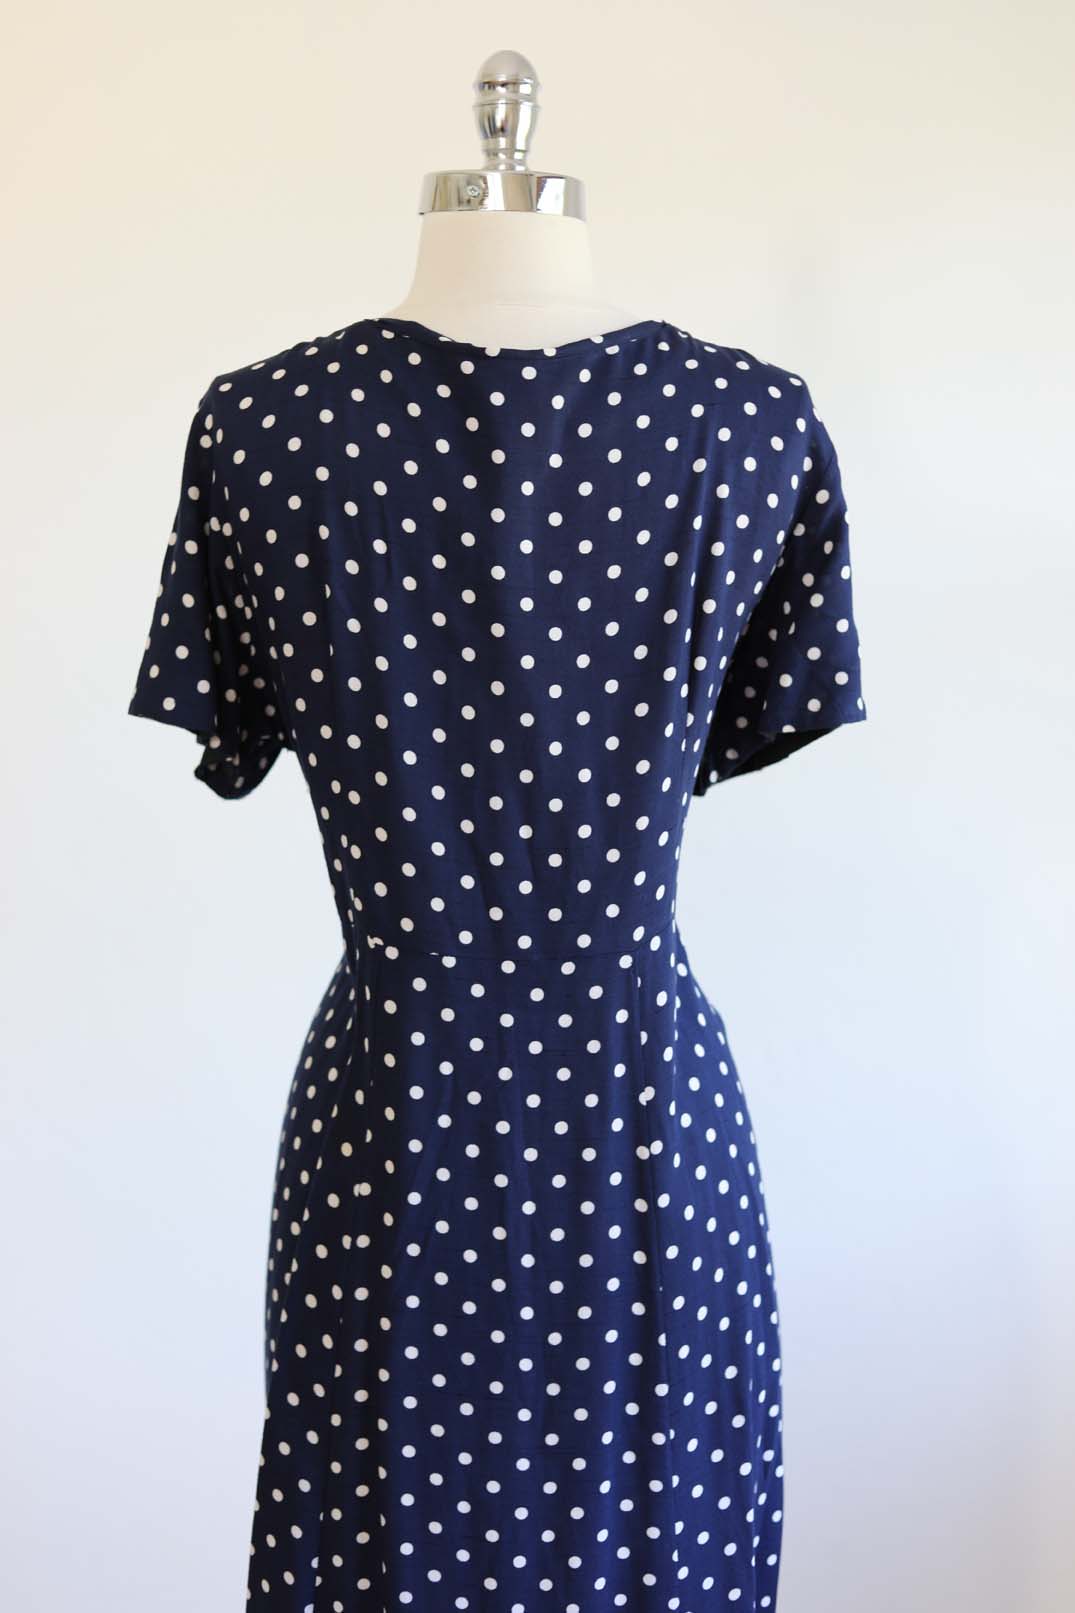 Vintage 1940s Dress - VOLUP Navy Blue White Swingy Cotton-y Rayon Frock w Sailor Novelty Buttons As-is Size XL